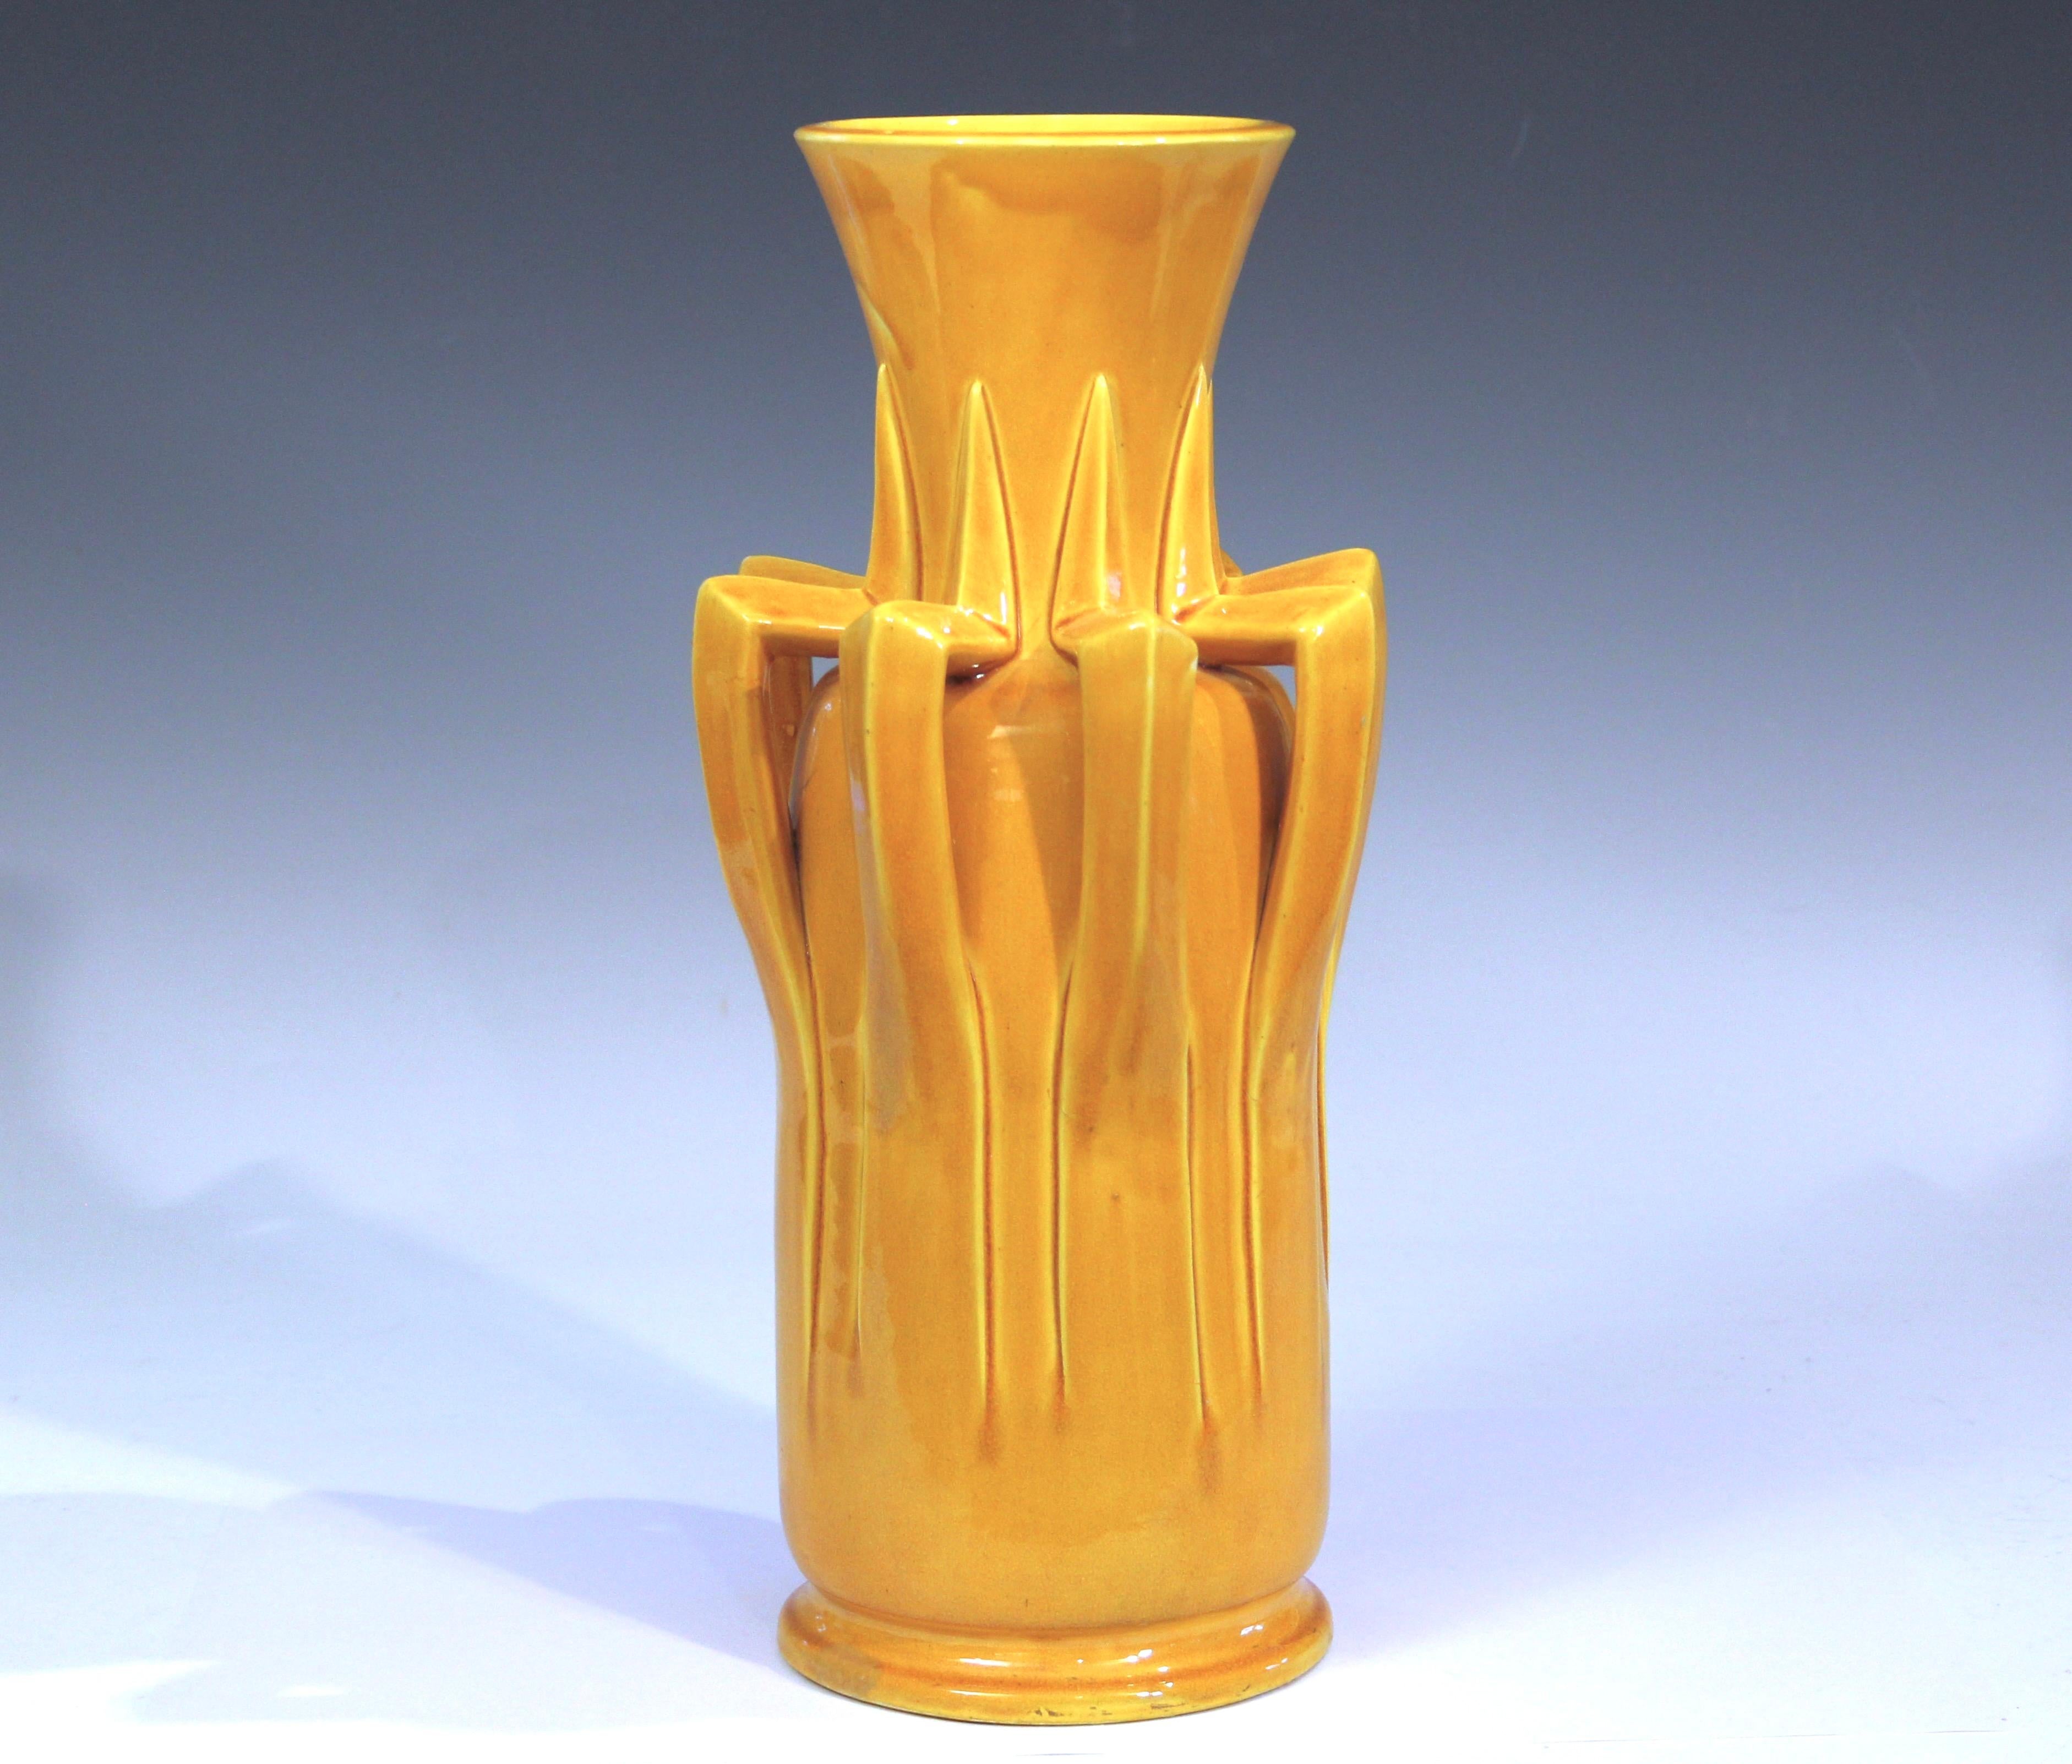 Antique hand turned Awaji pottery vase in terrific folded petal form with yellow crackle monochrome glaze, circa 1920. 14